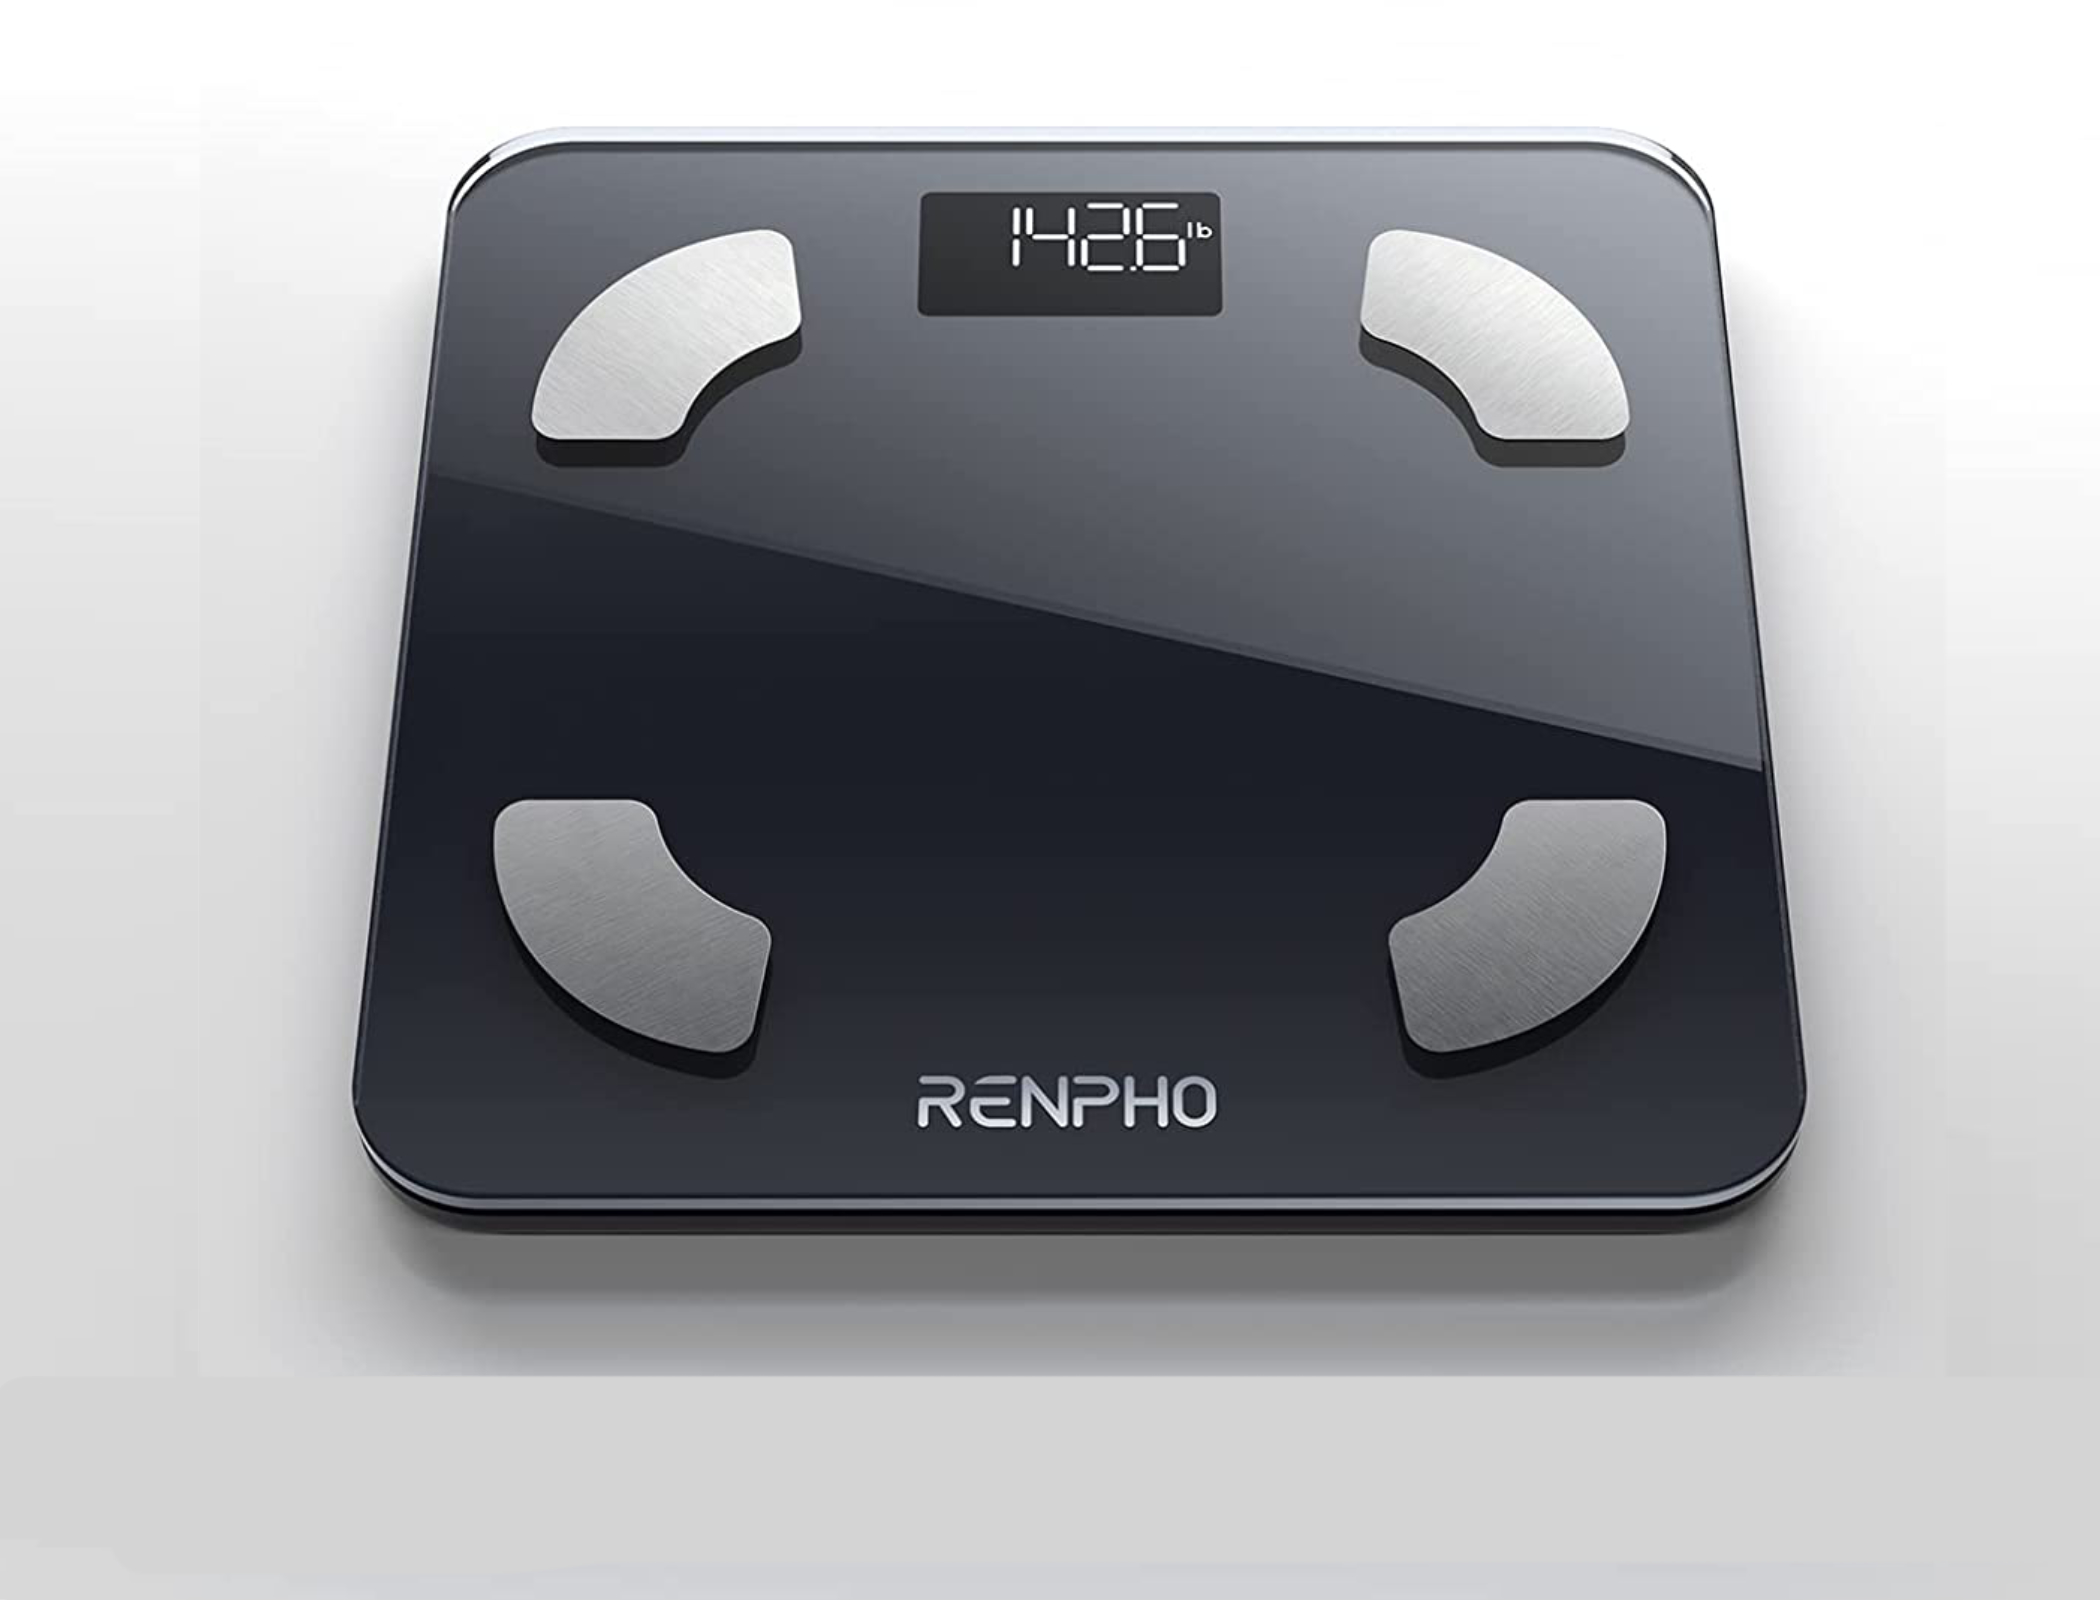 Hands-on review: Renpho Elis 1 Smart Scale